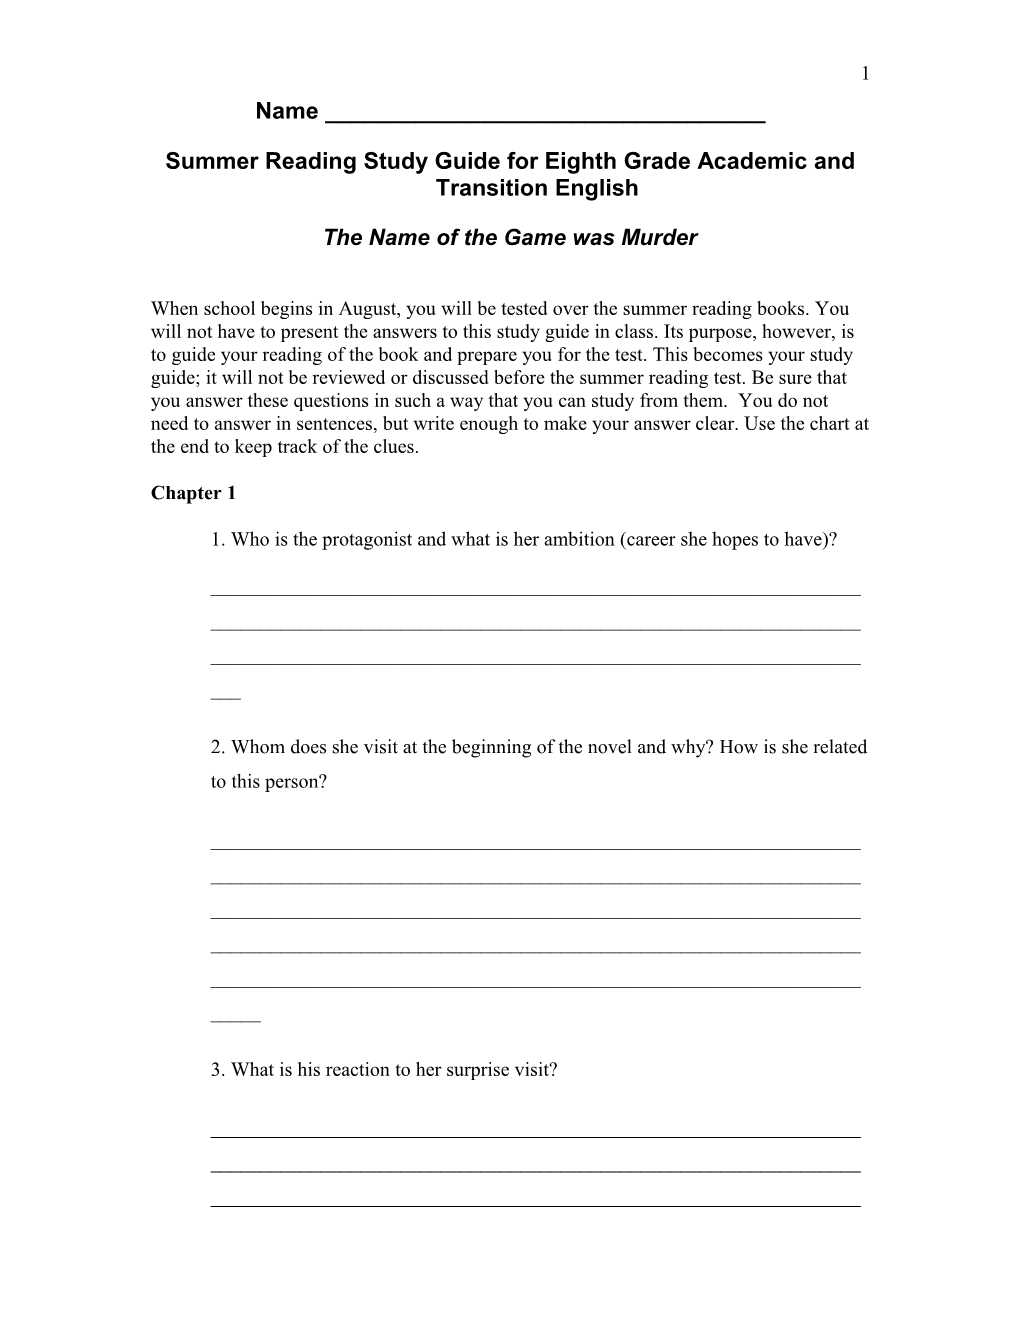 Summer Reading Study Guide for Eighth Grade Academic and Transition English